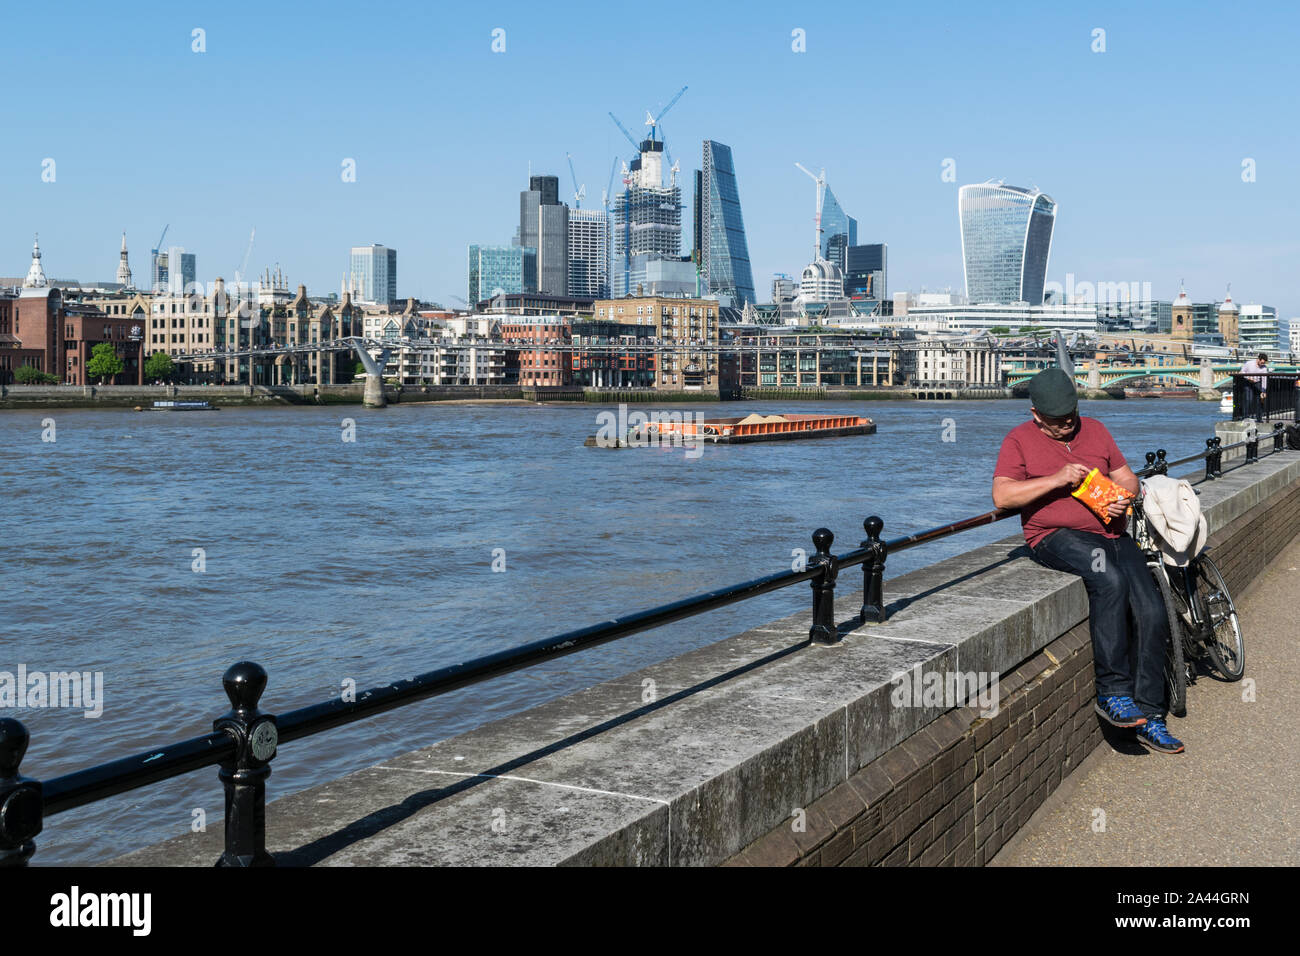 London, England - May 15, 2018:  A man takes a break along the edge of the Thames river on a bright sunny day Stock Photo